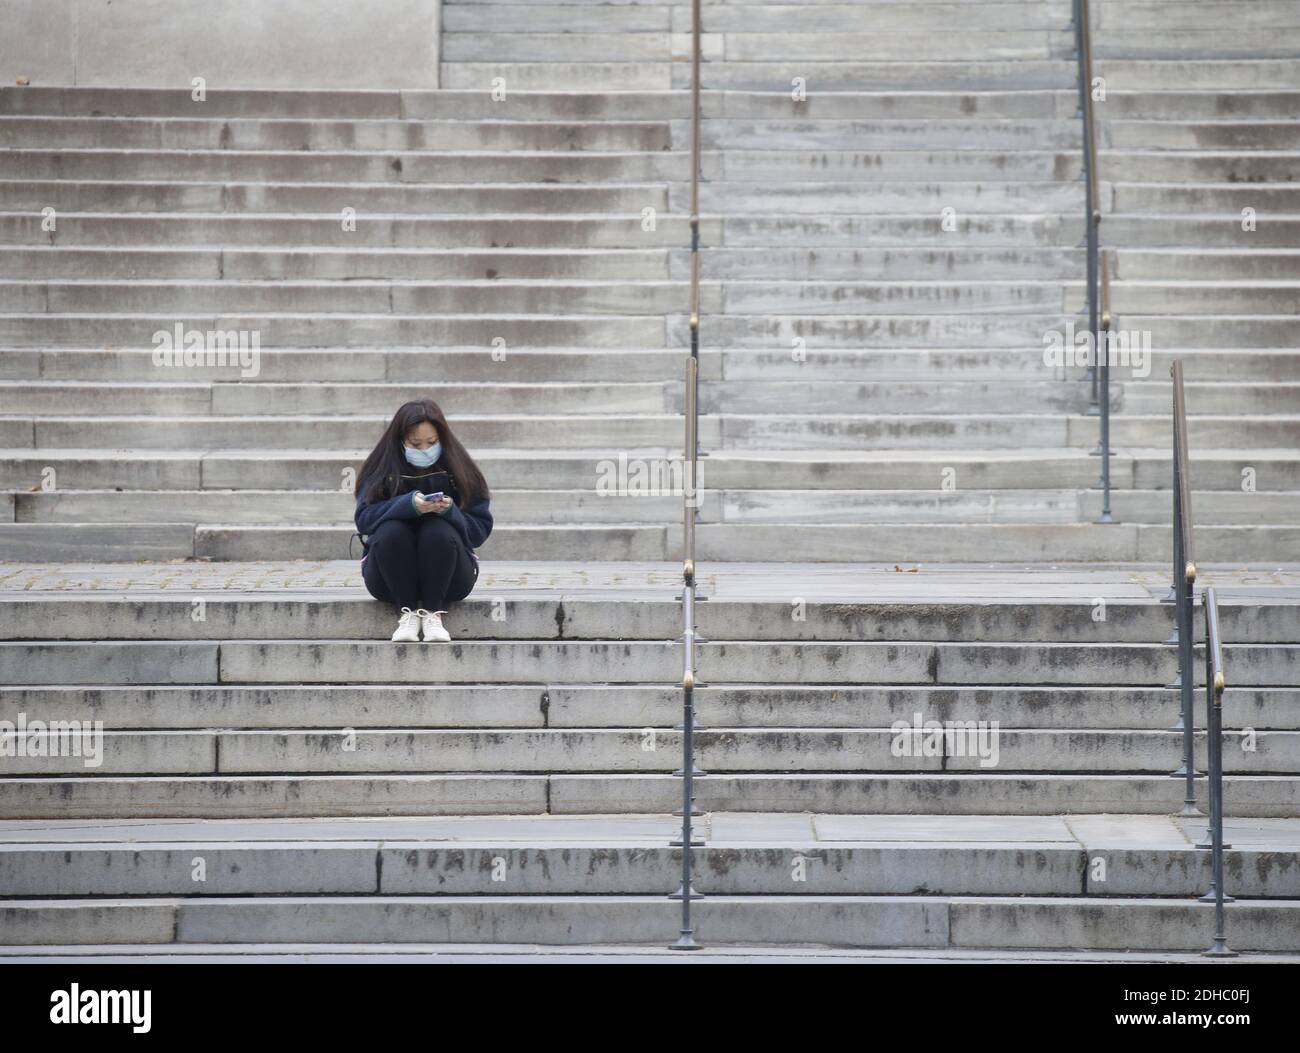 New York, United States. 10th Dec, 2020. A woman sits on the stairs to the New York Public Library wearing a face mask to protect from and prevent the spread COIVD-19 in New York City on Thursday, December 10, 2020. Photo by John Angelillo/UPI Credit: UPI/Alamy Live News Stock Photo